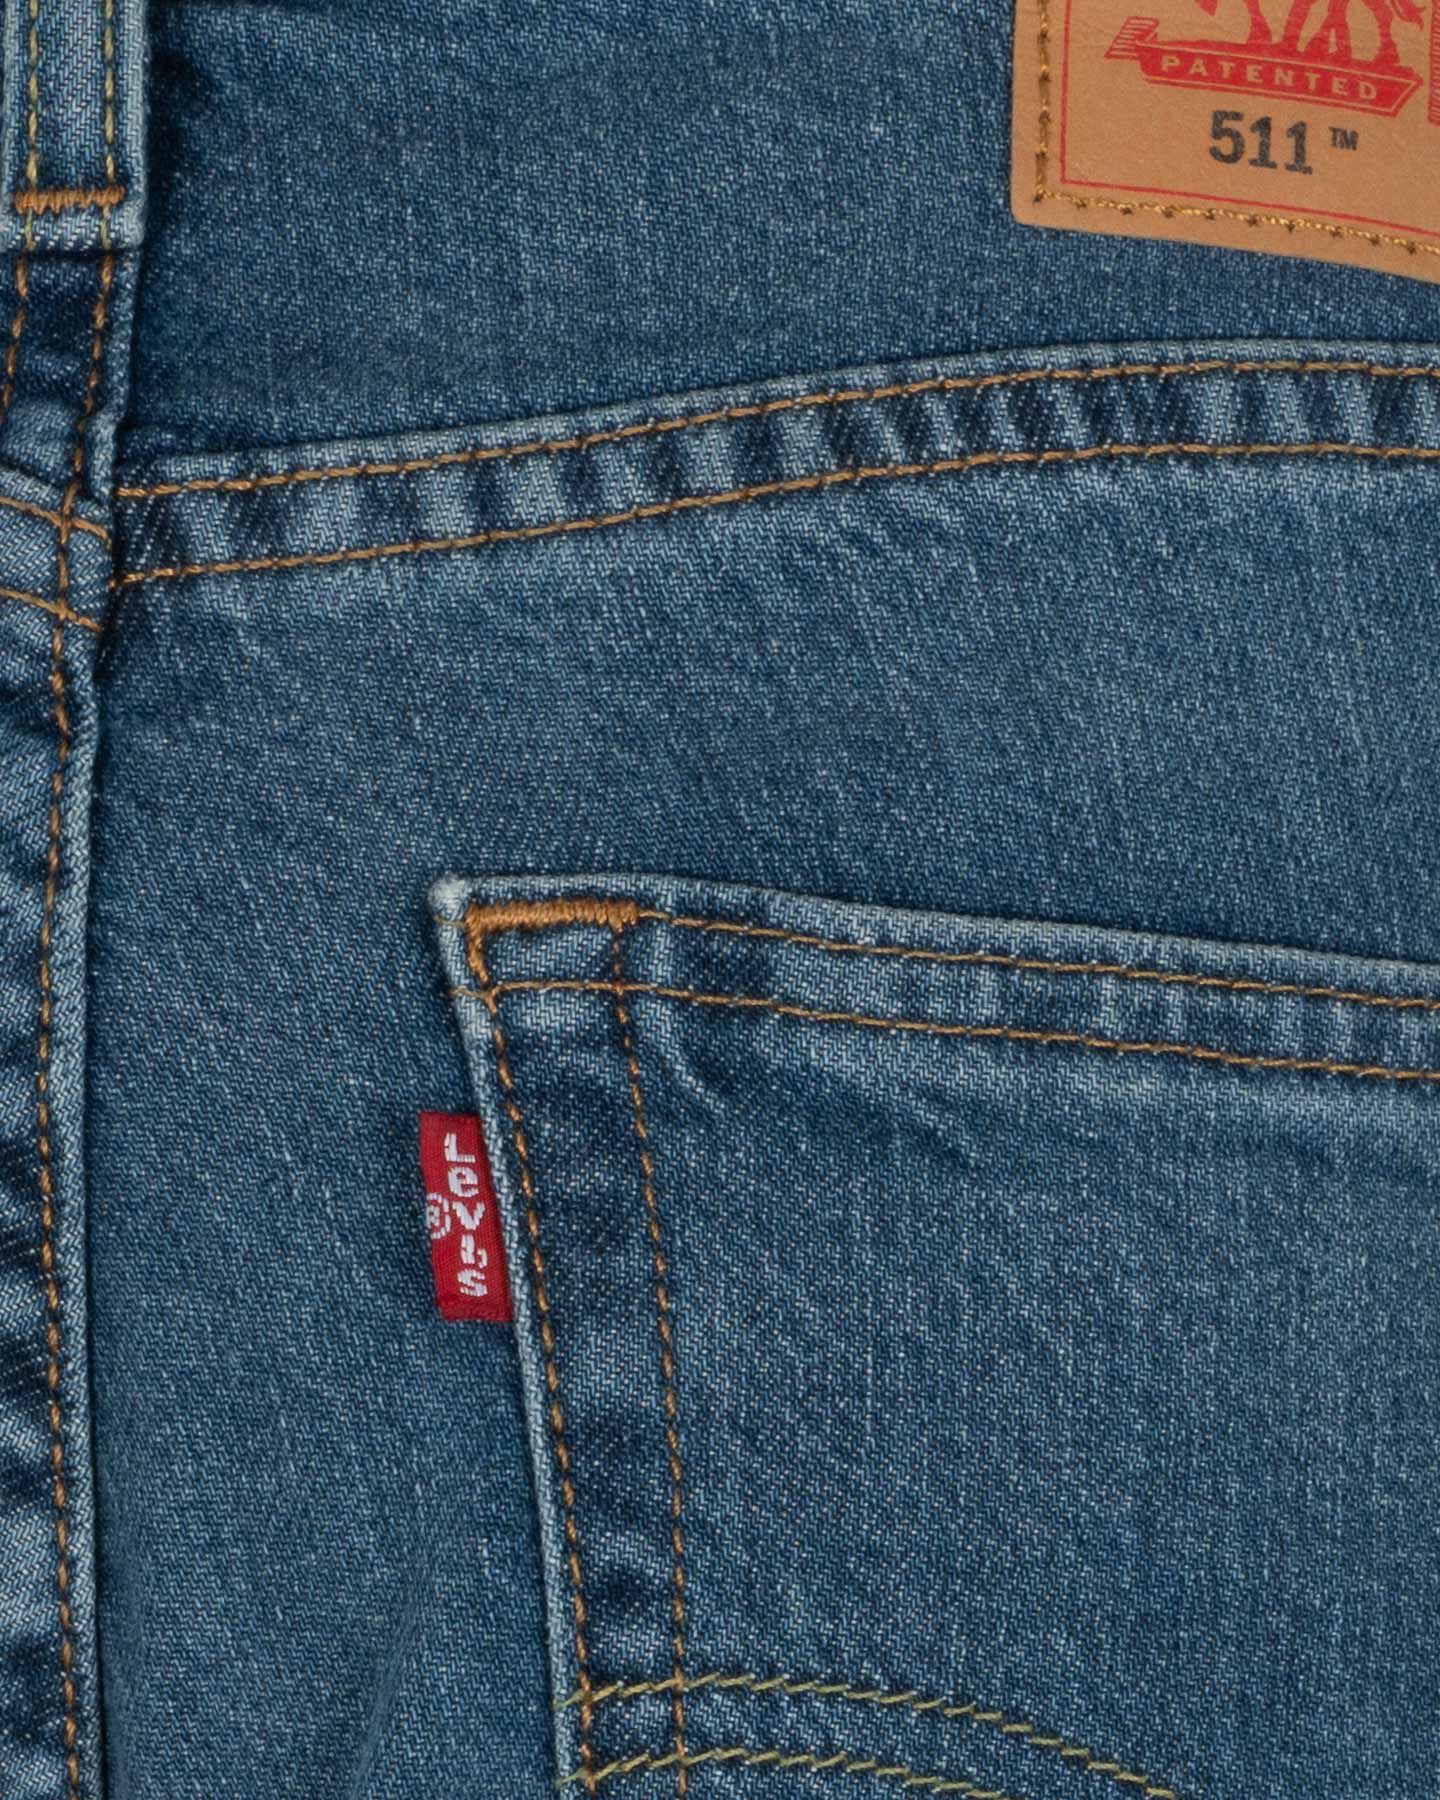  Jeans LEVI'S 511 SLIM FIT M S4131459|5855|29 scatto 2